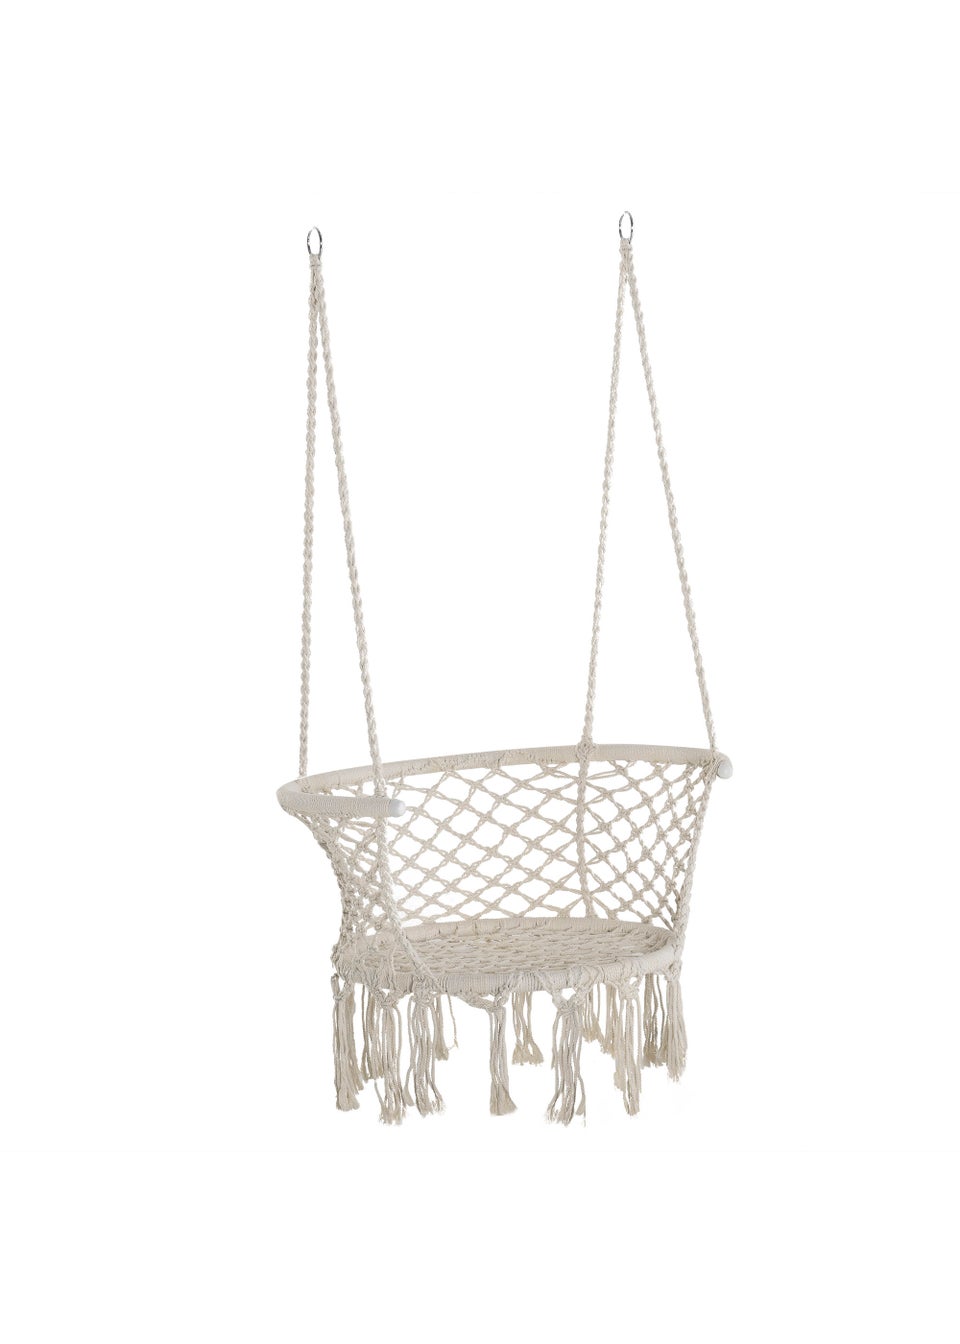 Outsunny Outdoor Hanging Rope Chair with Cotton Rope, Cotton-Polyester Blend Macrame Garden Hammock Chair